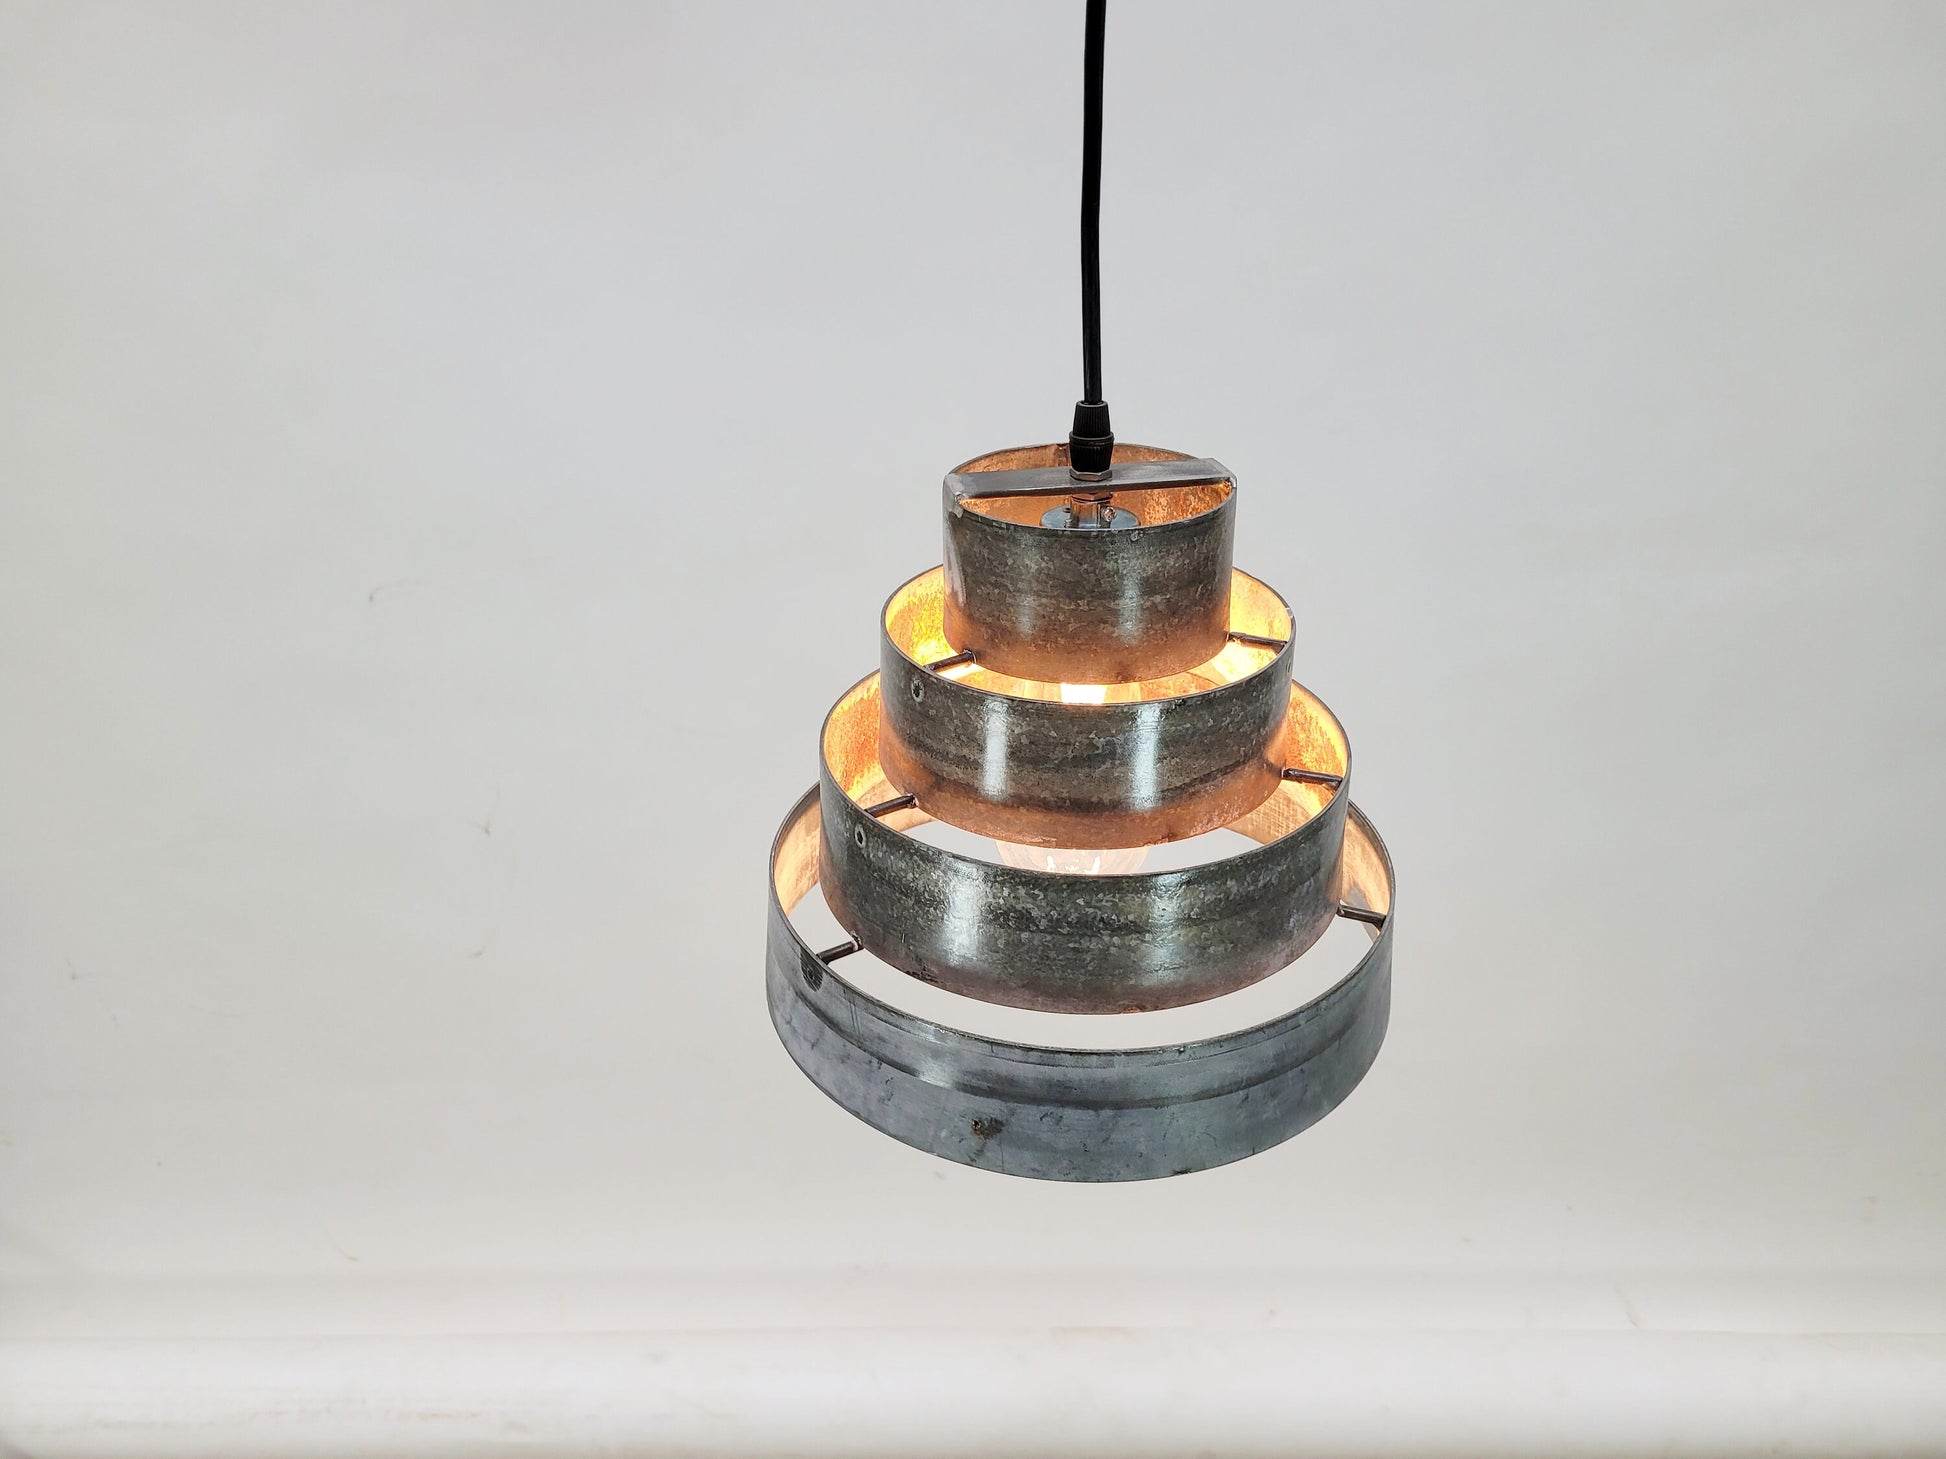 Wine Barrel Ring Pendant Light - Keilur - Made from Retired California wine barrel rings. 100% Recycled!ings 100% Recycled!